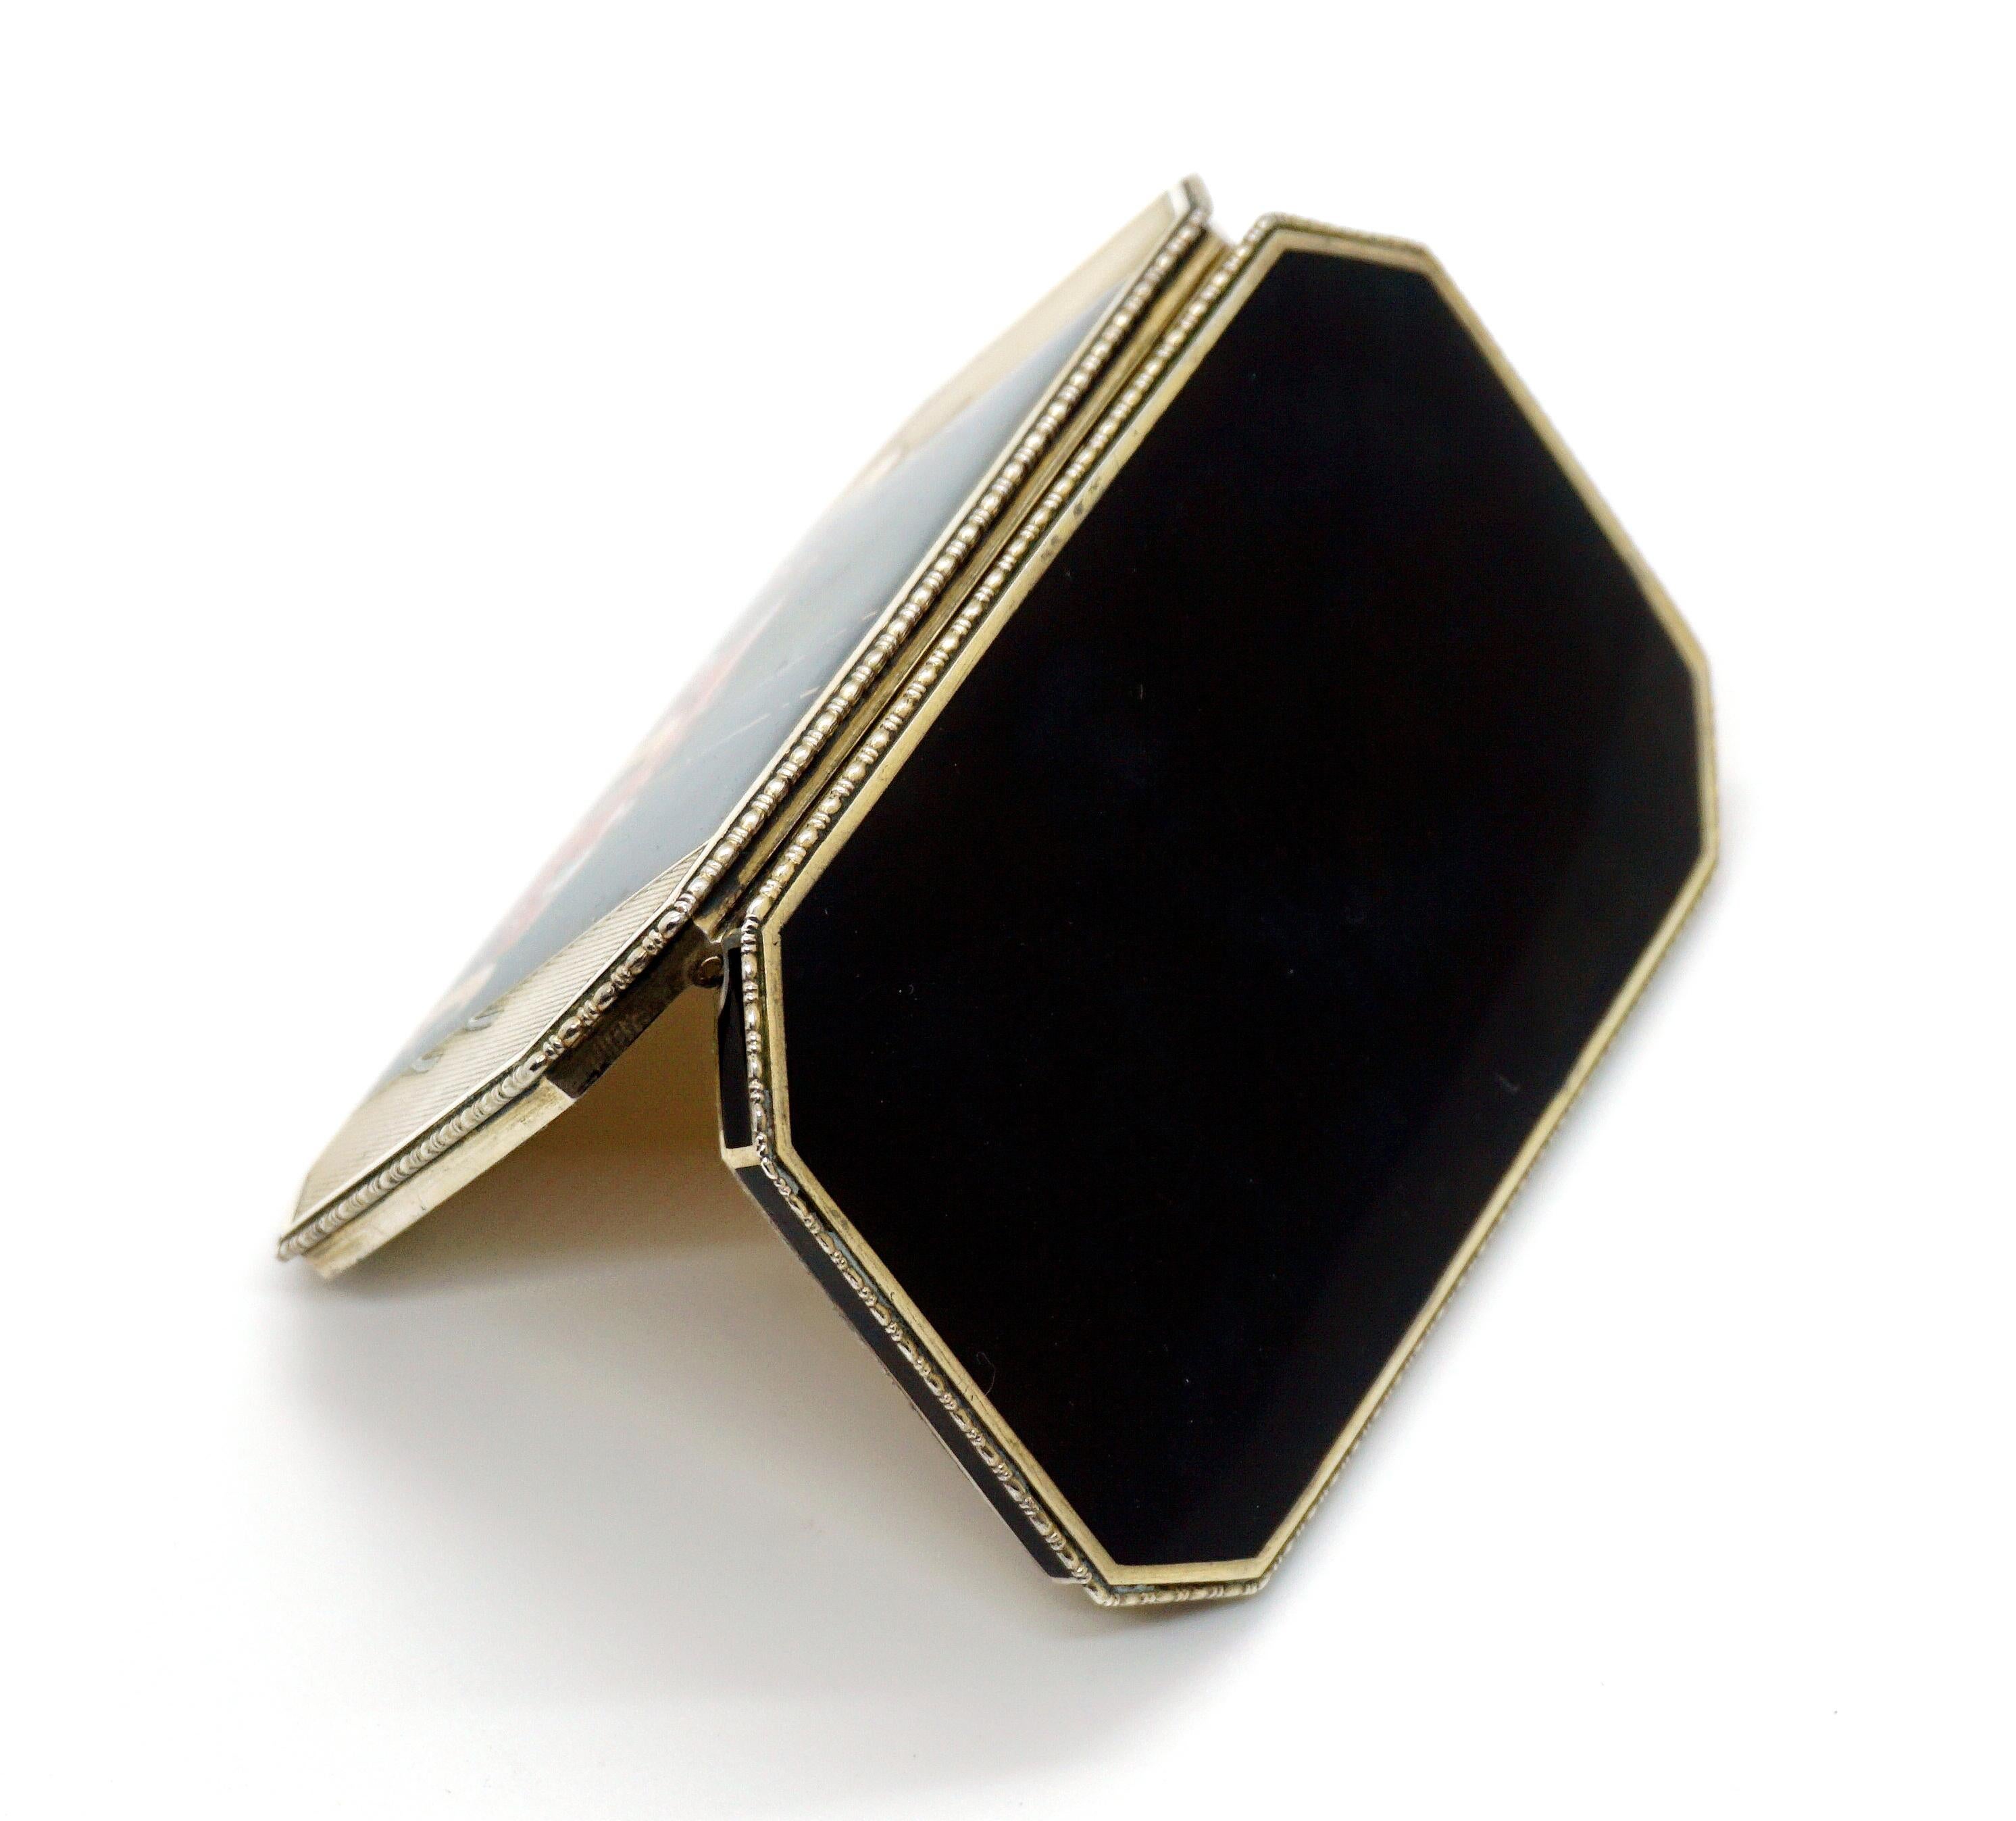 Exquisite Austrian Art Deco enamel box

Octagonal 935 sterling silver cigarette box, partly guilloché, all-round trim, black enamel on top and bottom and on the sides of the lower half of the box. On the lid connected with a hinge, an Austro